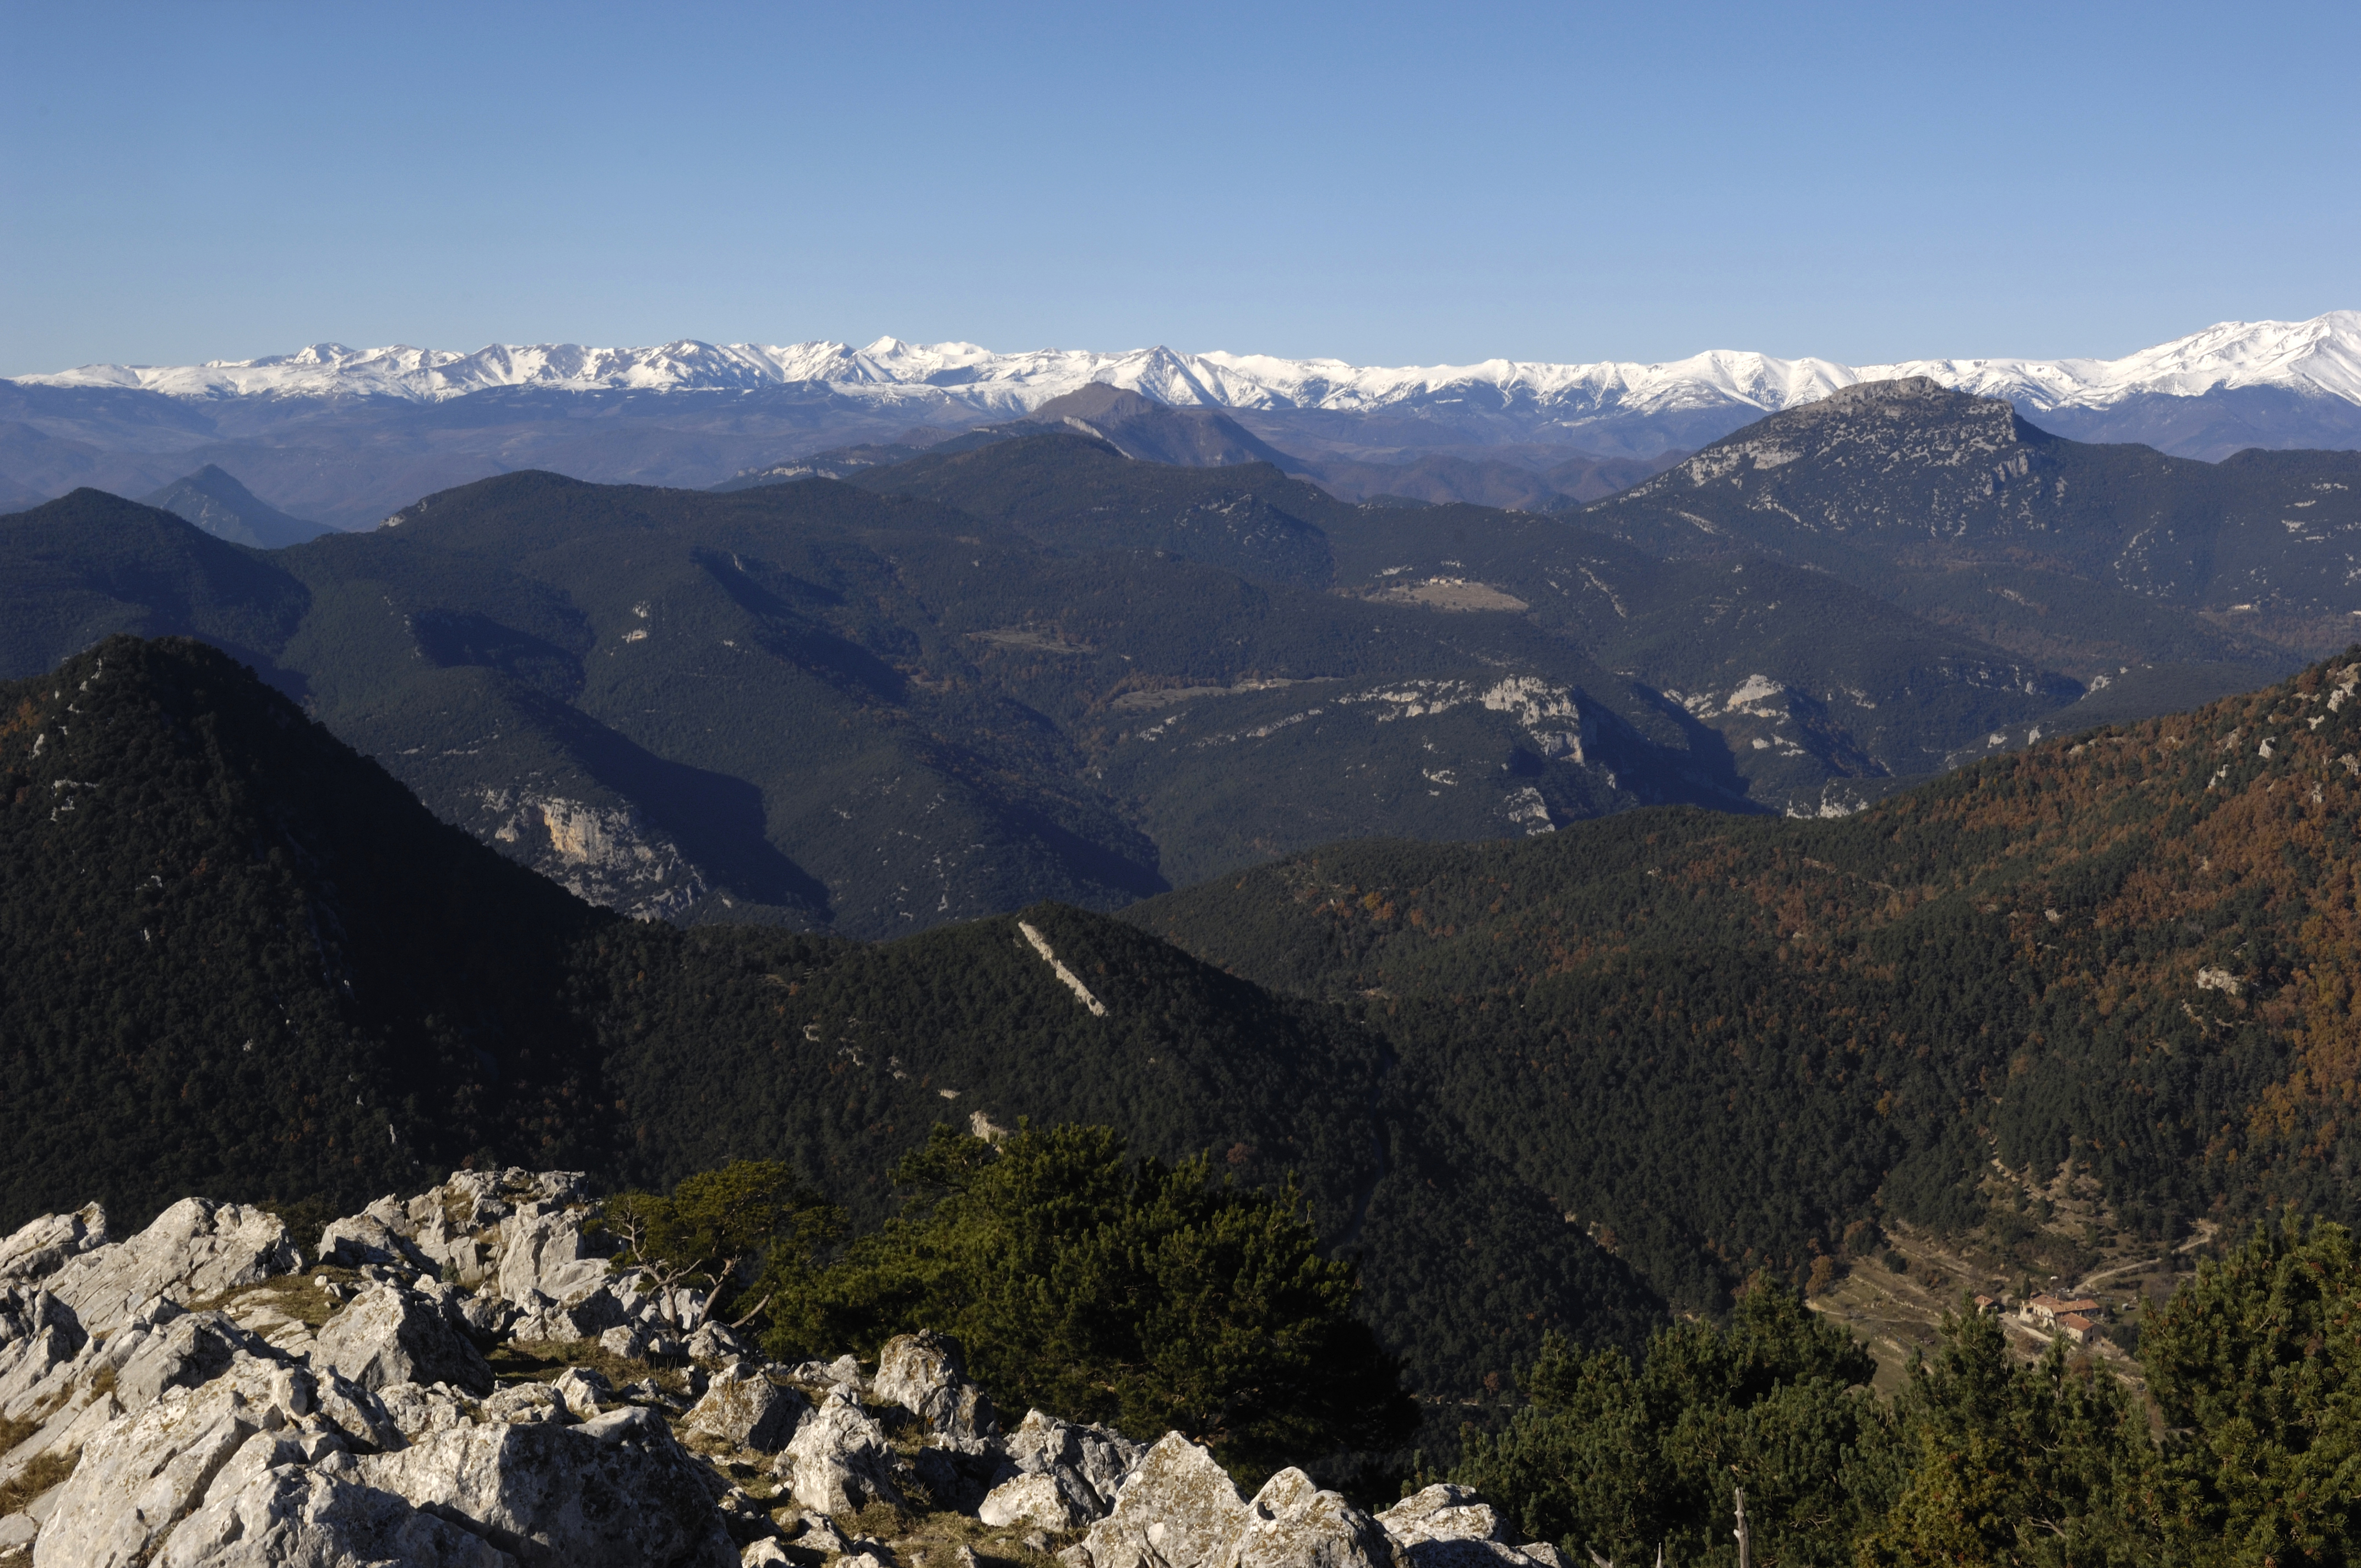 mh-girona-top-del-mont